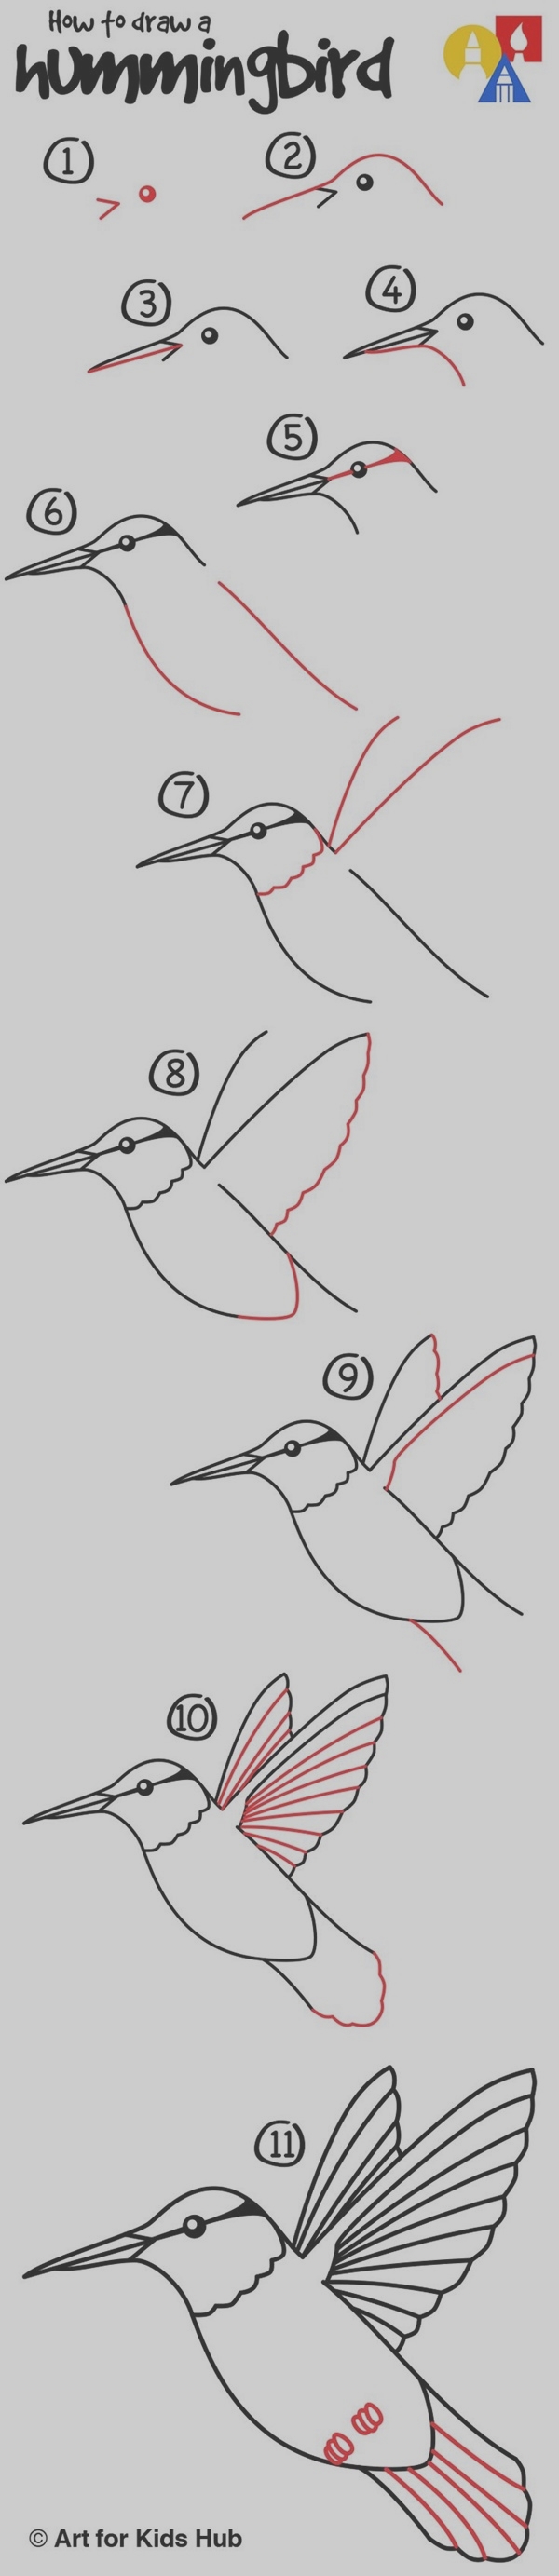 Easy Step by Step Art Drawings to Practice (5)